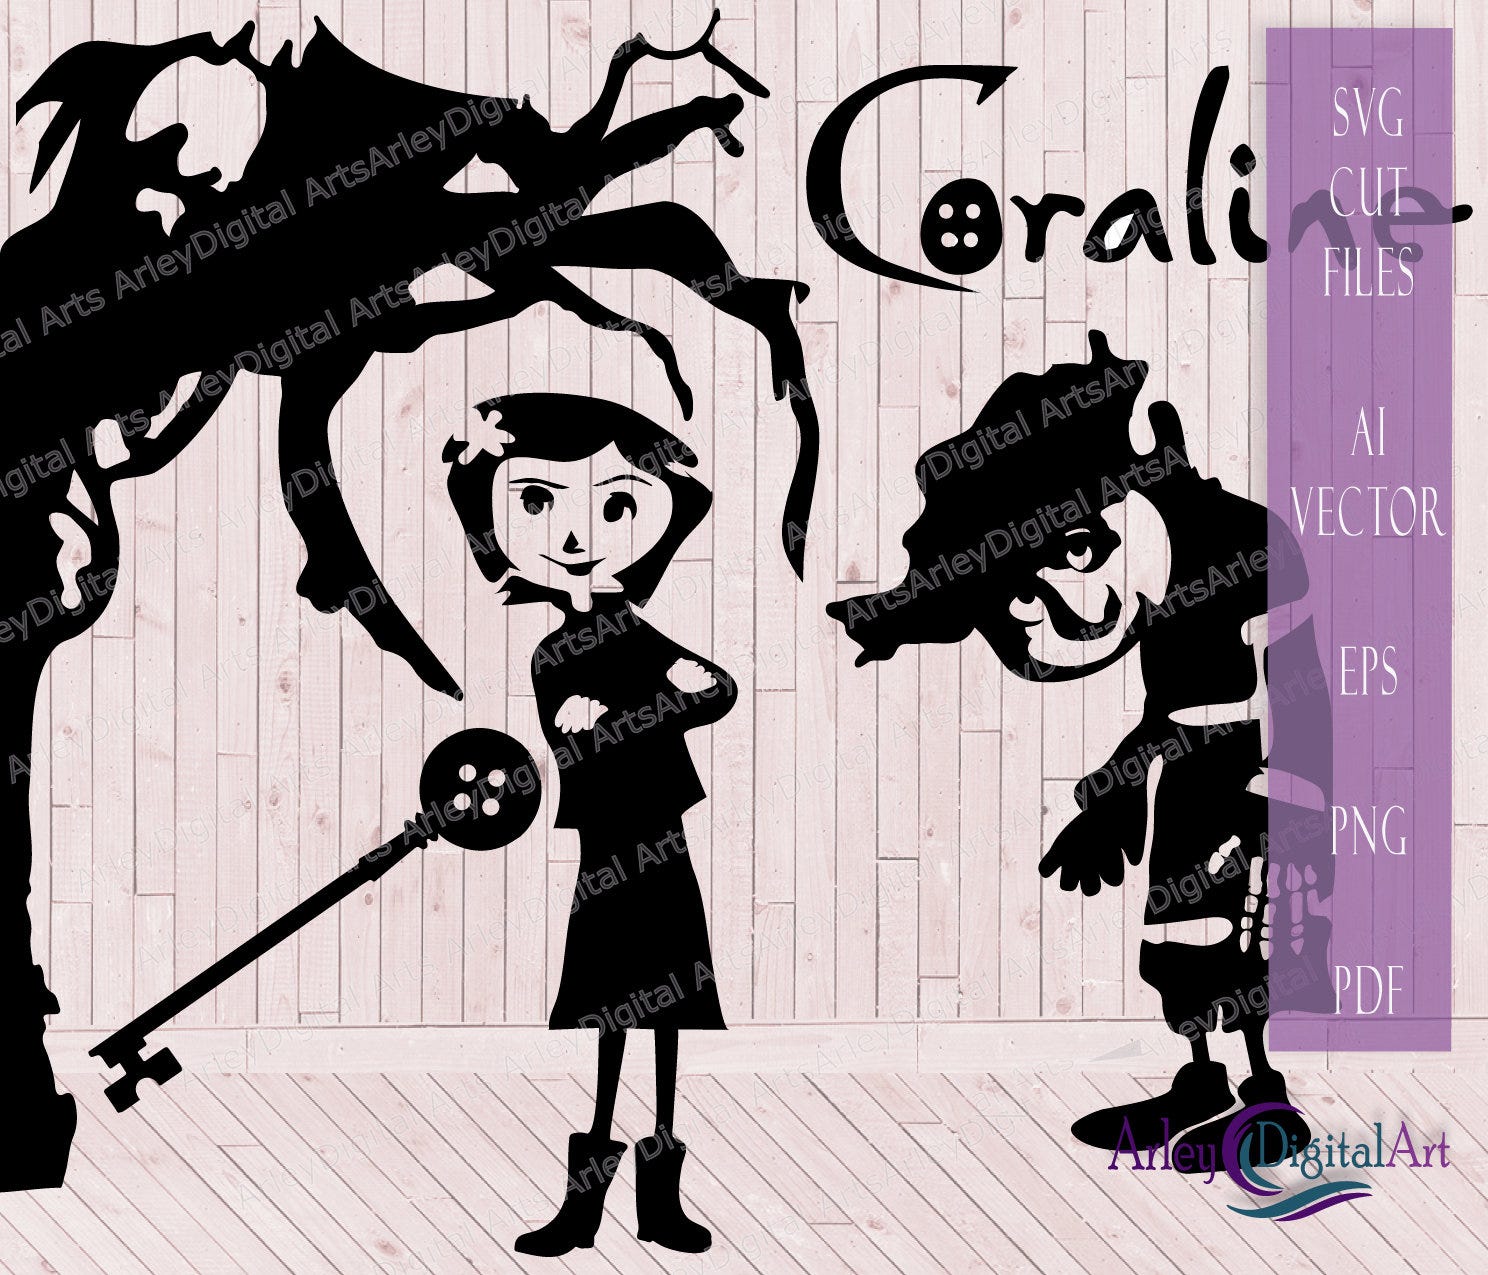 Coraline and Wybie Lovat SVG for Silhouette Cut Files, Coraline bundle, Key, Digital File, PNG horror movie, instant download files.